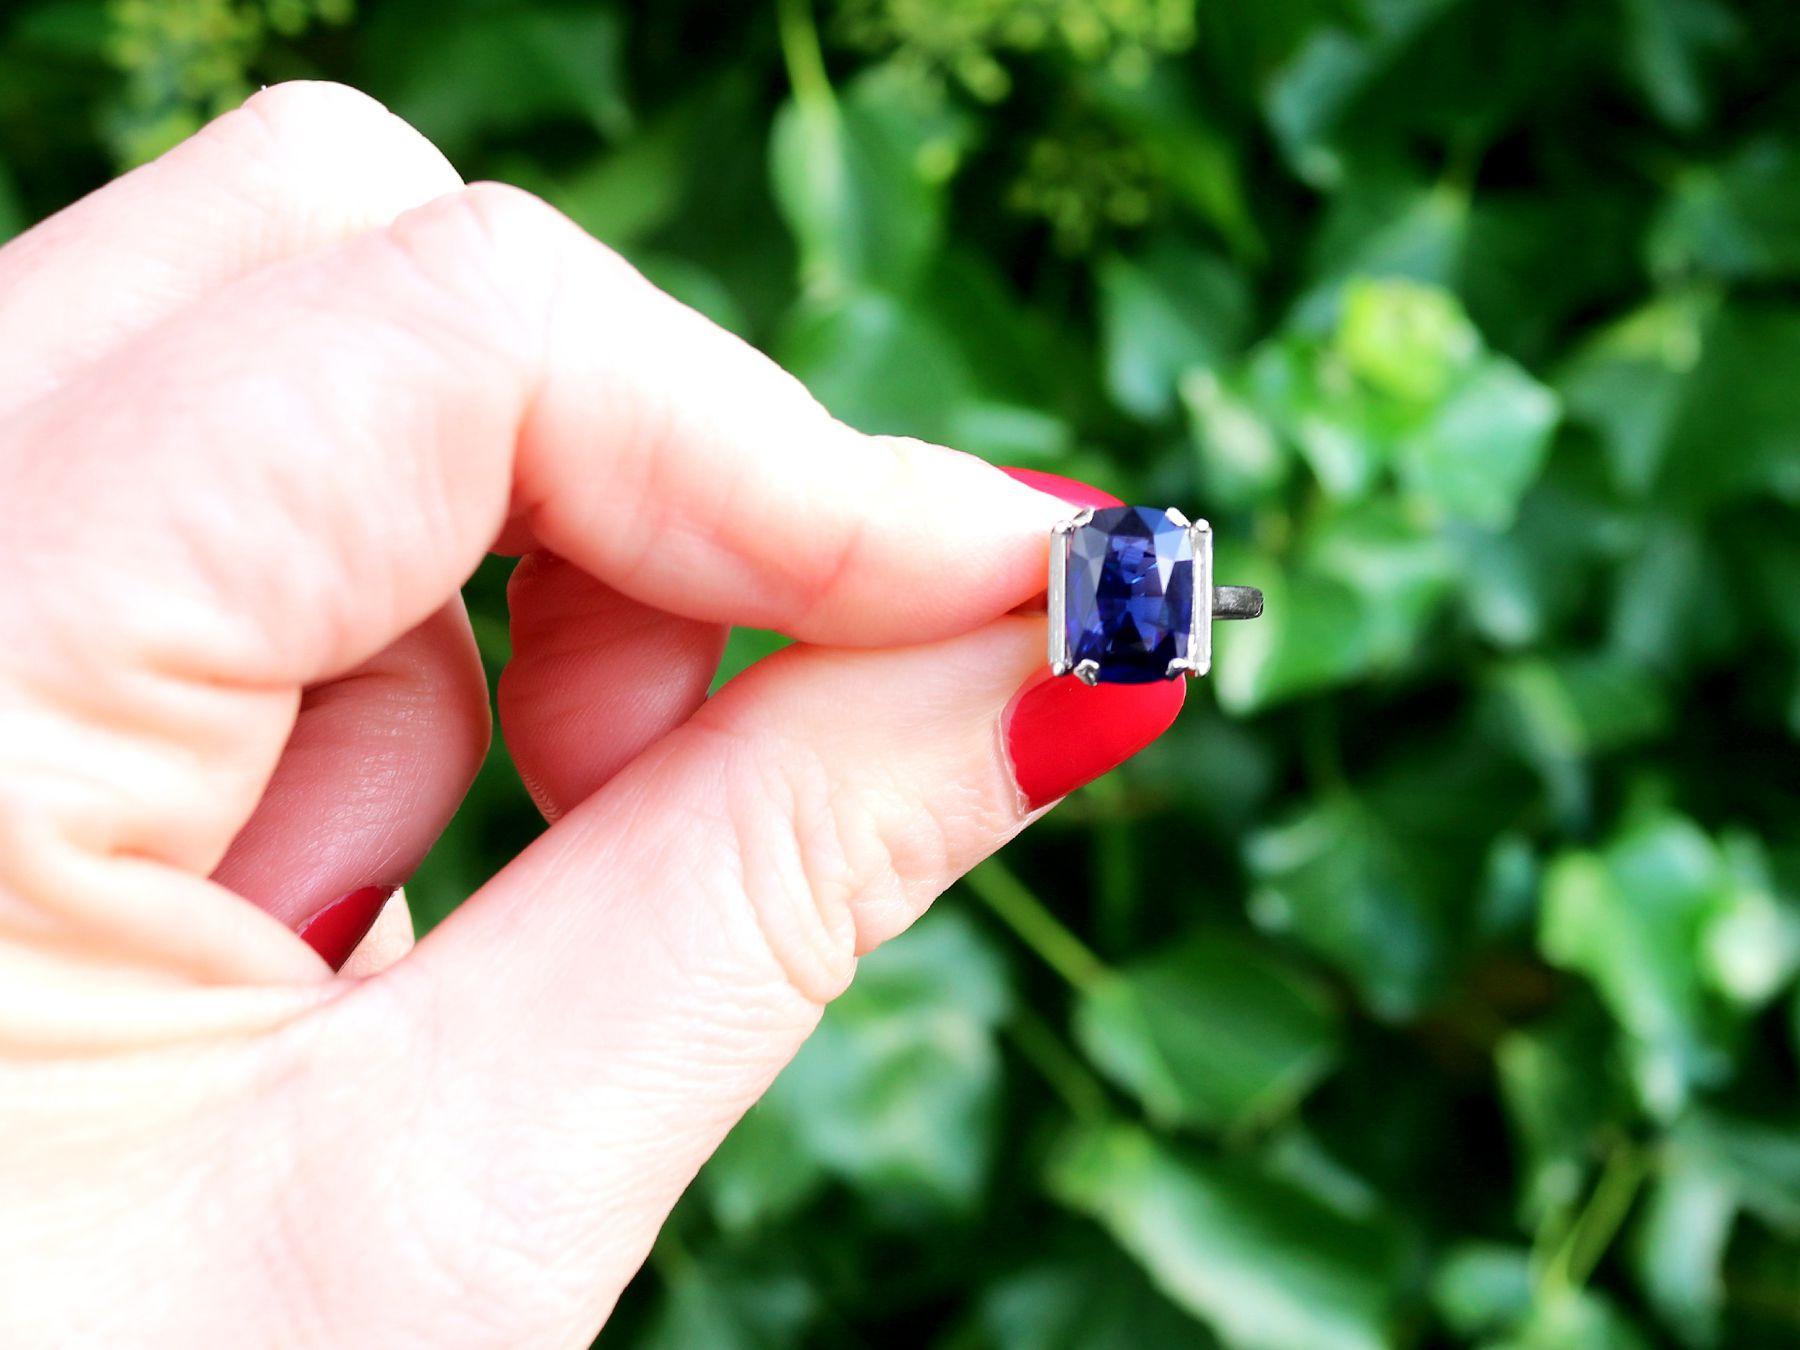 A stunning vintage 2.99 carat natural blue sapphire and 0.38 carat diamond, 18 karat white gold cocktail ring; part of diverse gemstone jewelry collections.

This stunning, fine and impressive cushion cut blue sapphire ring has been crafted in 18k